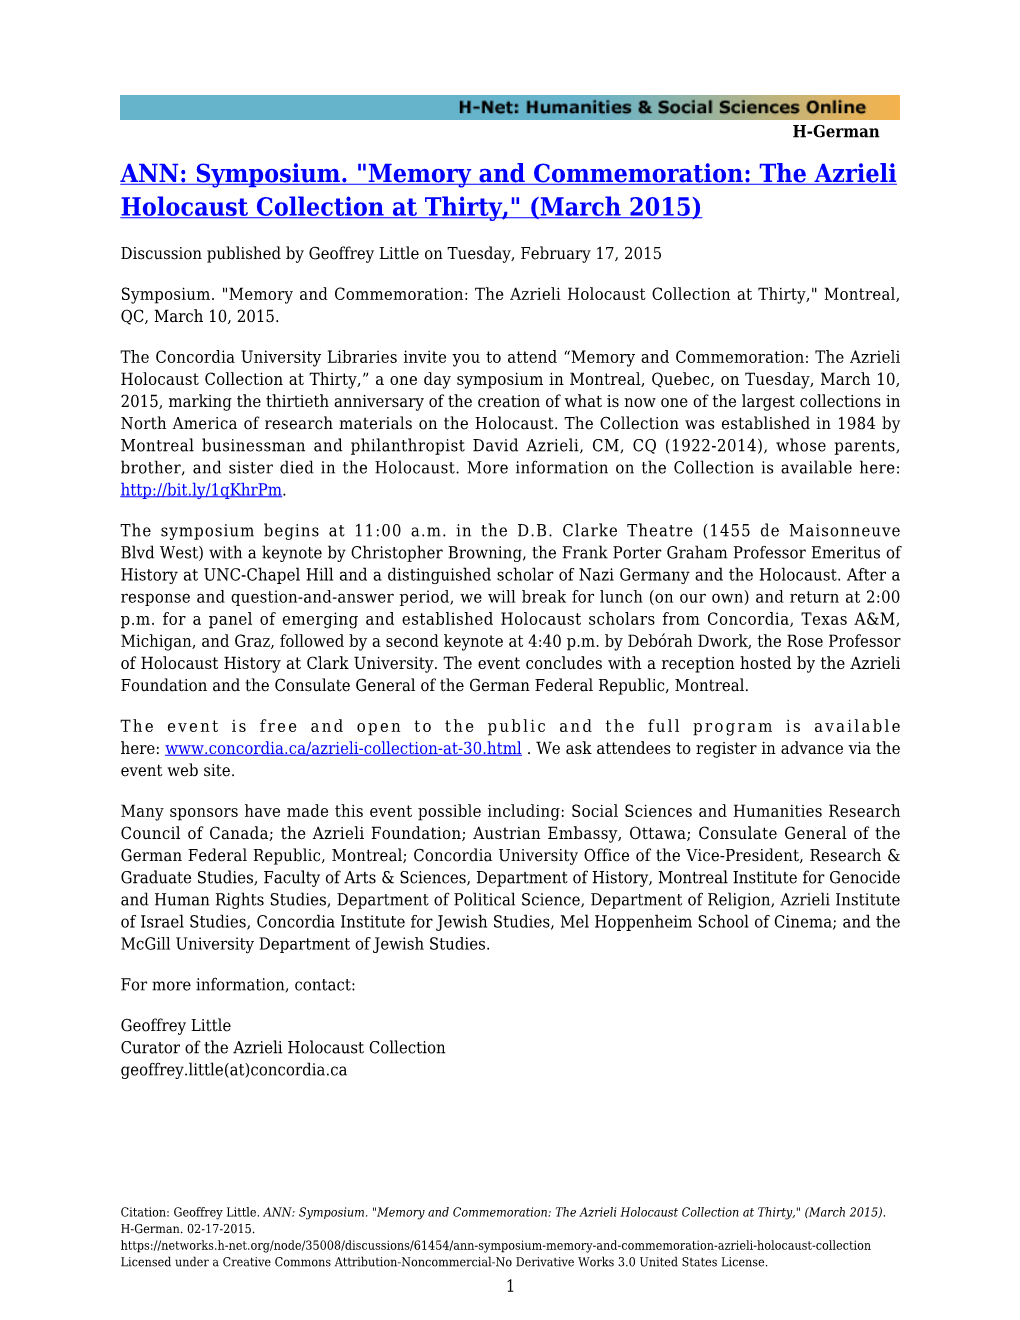 ANN: Symposium. "Memory and Commemoration: the Azrieli Holocaust Collection at Thirty," (March 2015)